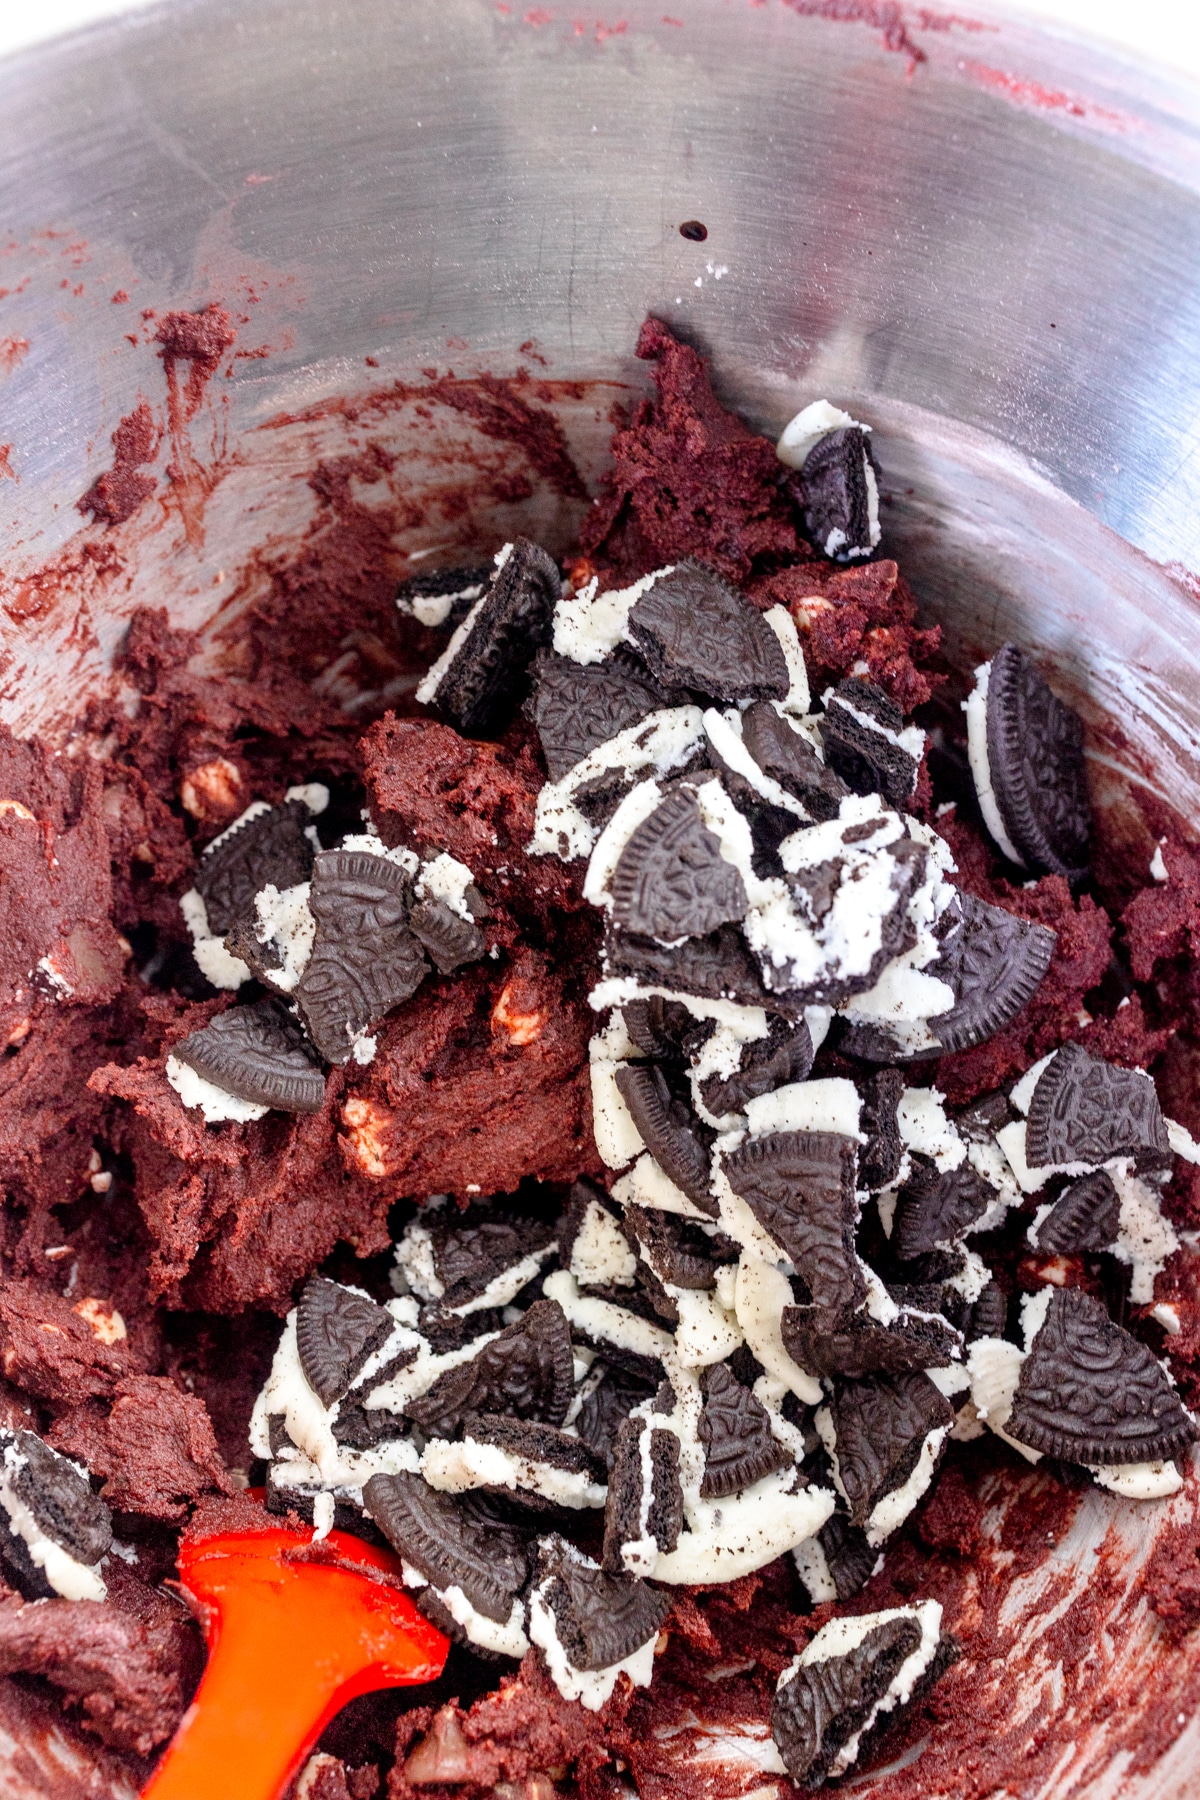 Mix in Oreo Cookie pieces with chocolate chips to Red Velvet Oreo Cookie dough